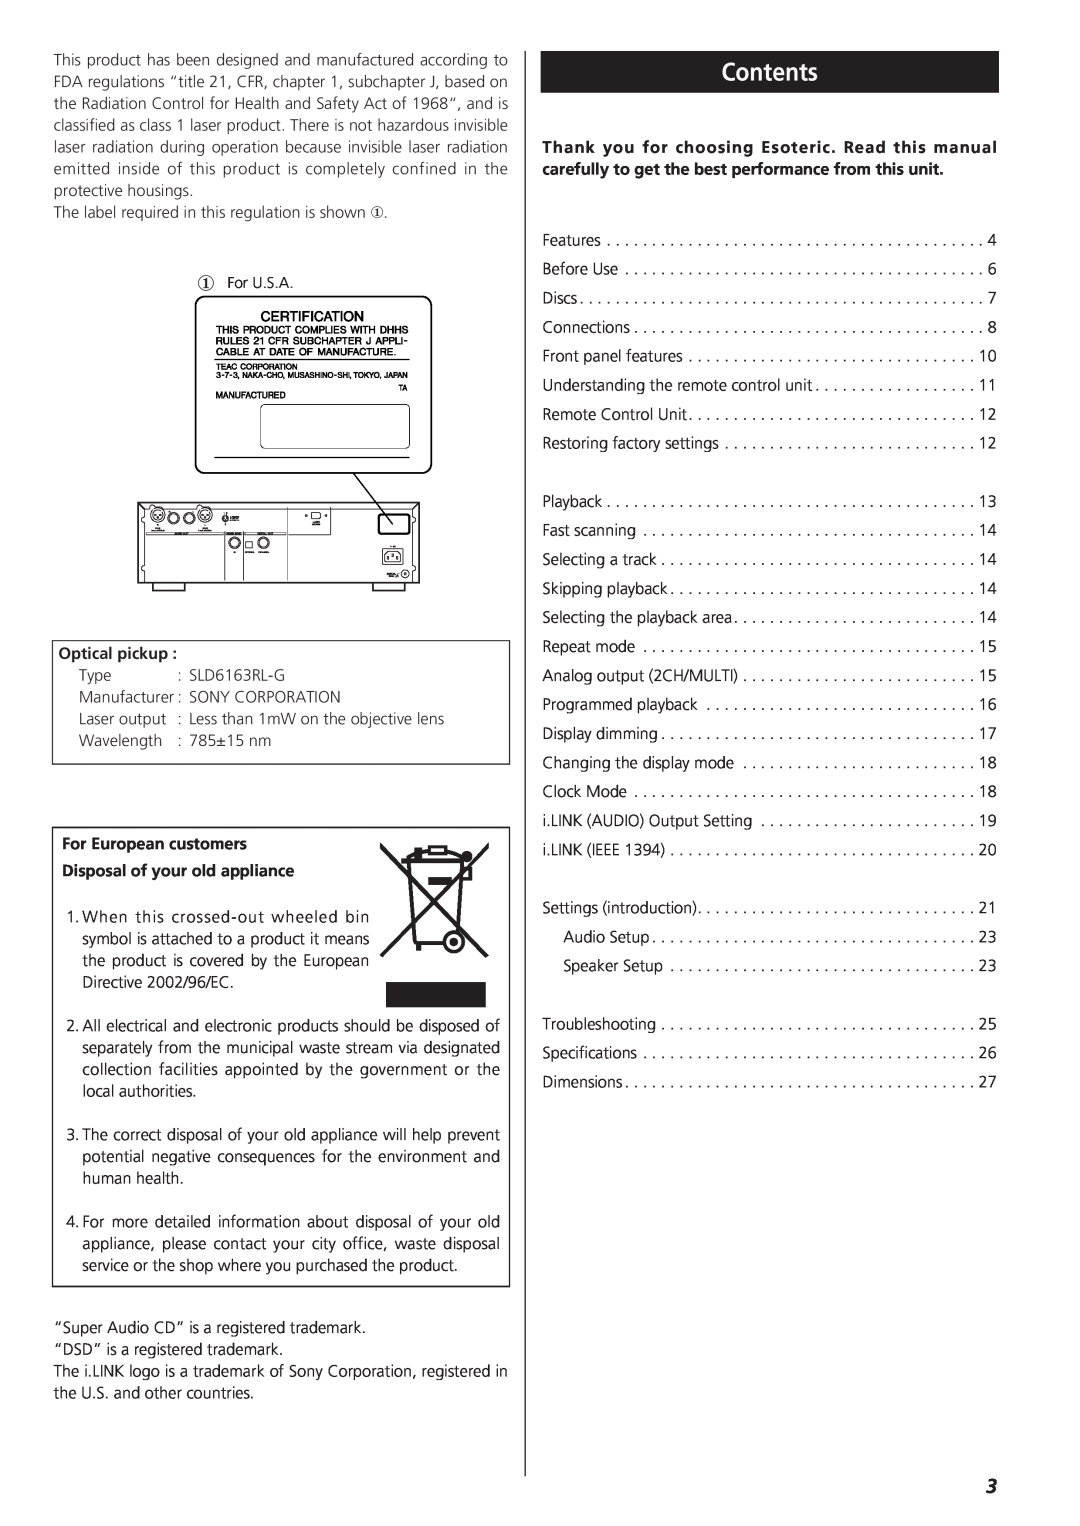 Esoteric X-03 owner manual Contents, Optical pickup, For European customers, Disposal of your old appliance 